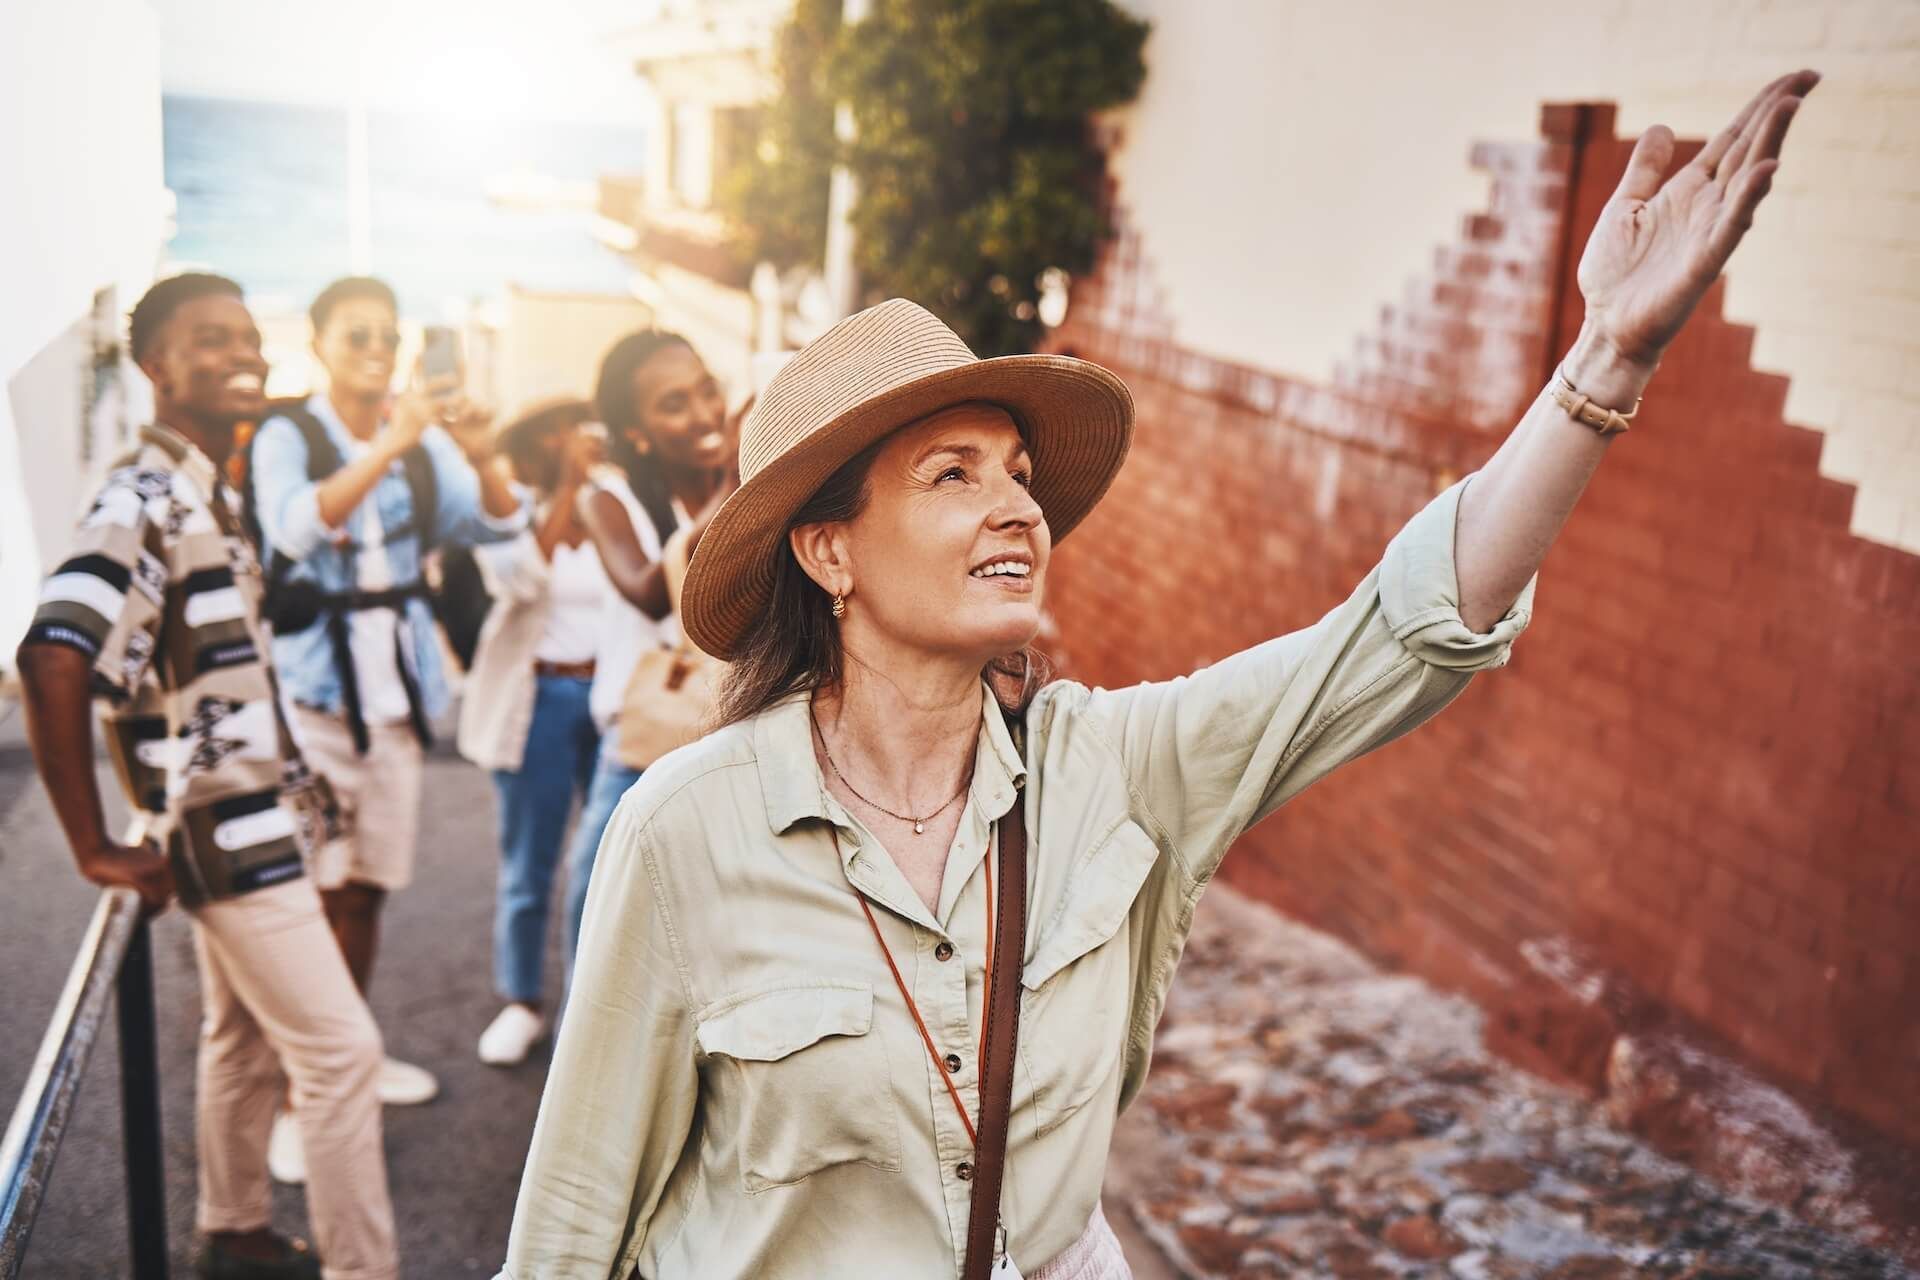 A woman in a hat is giving a tour to a group of people.